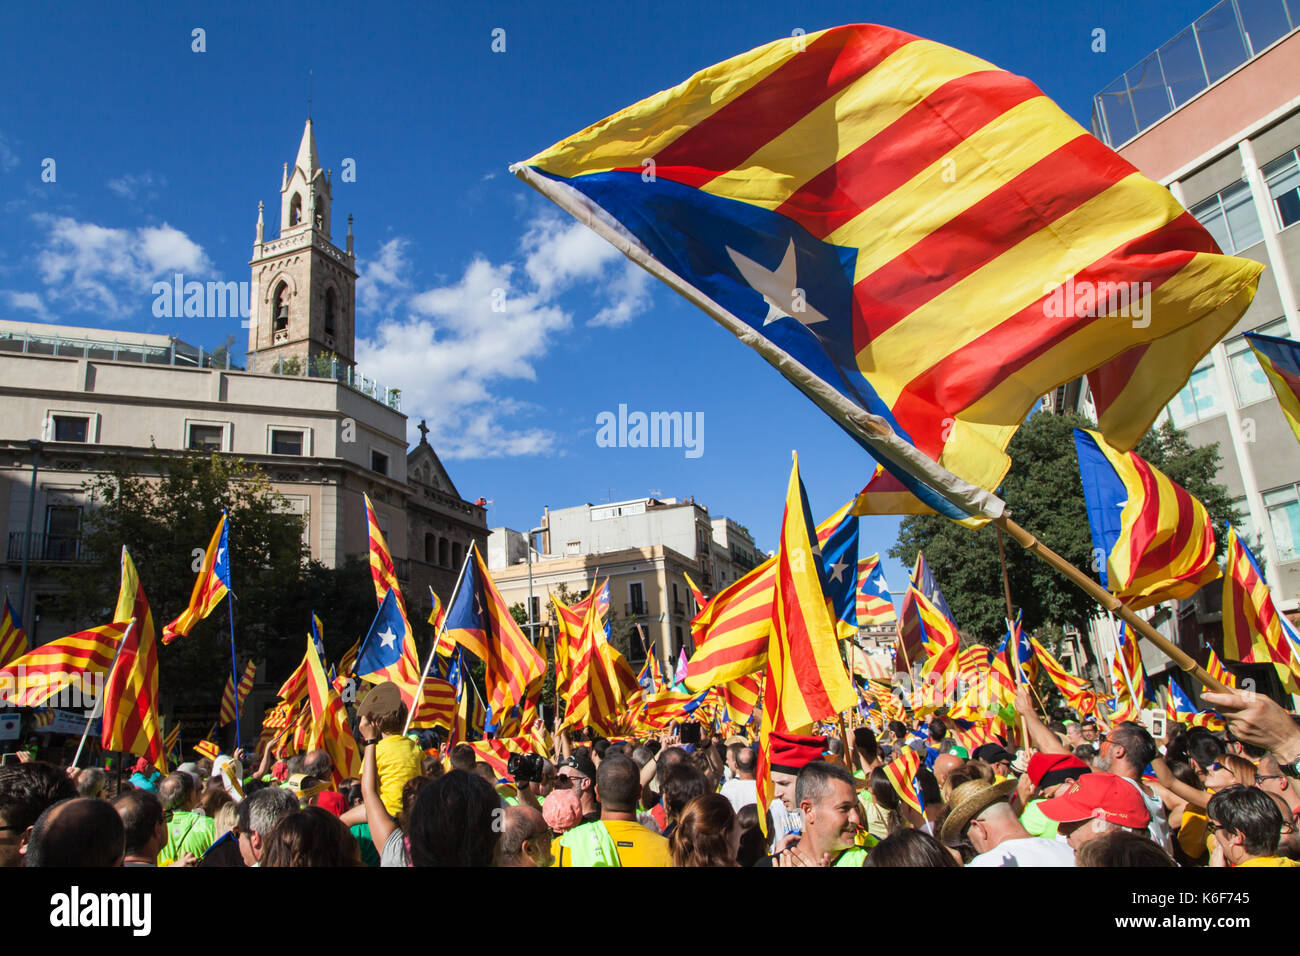 Barcelona, Spain - September 11, 2017: Catalans waving Estelada flags during march for independence on September 11, 2017 in Barcelona, Spain. Stock Photo